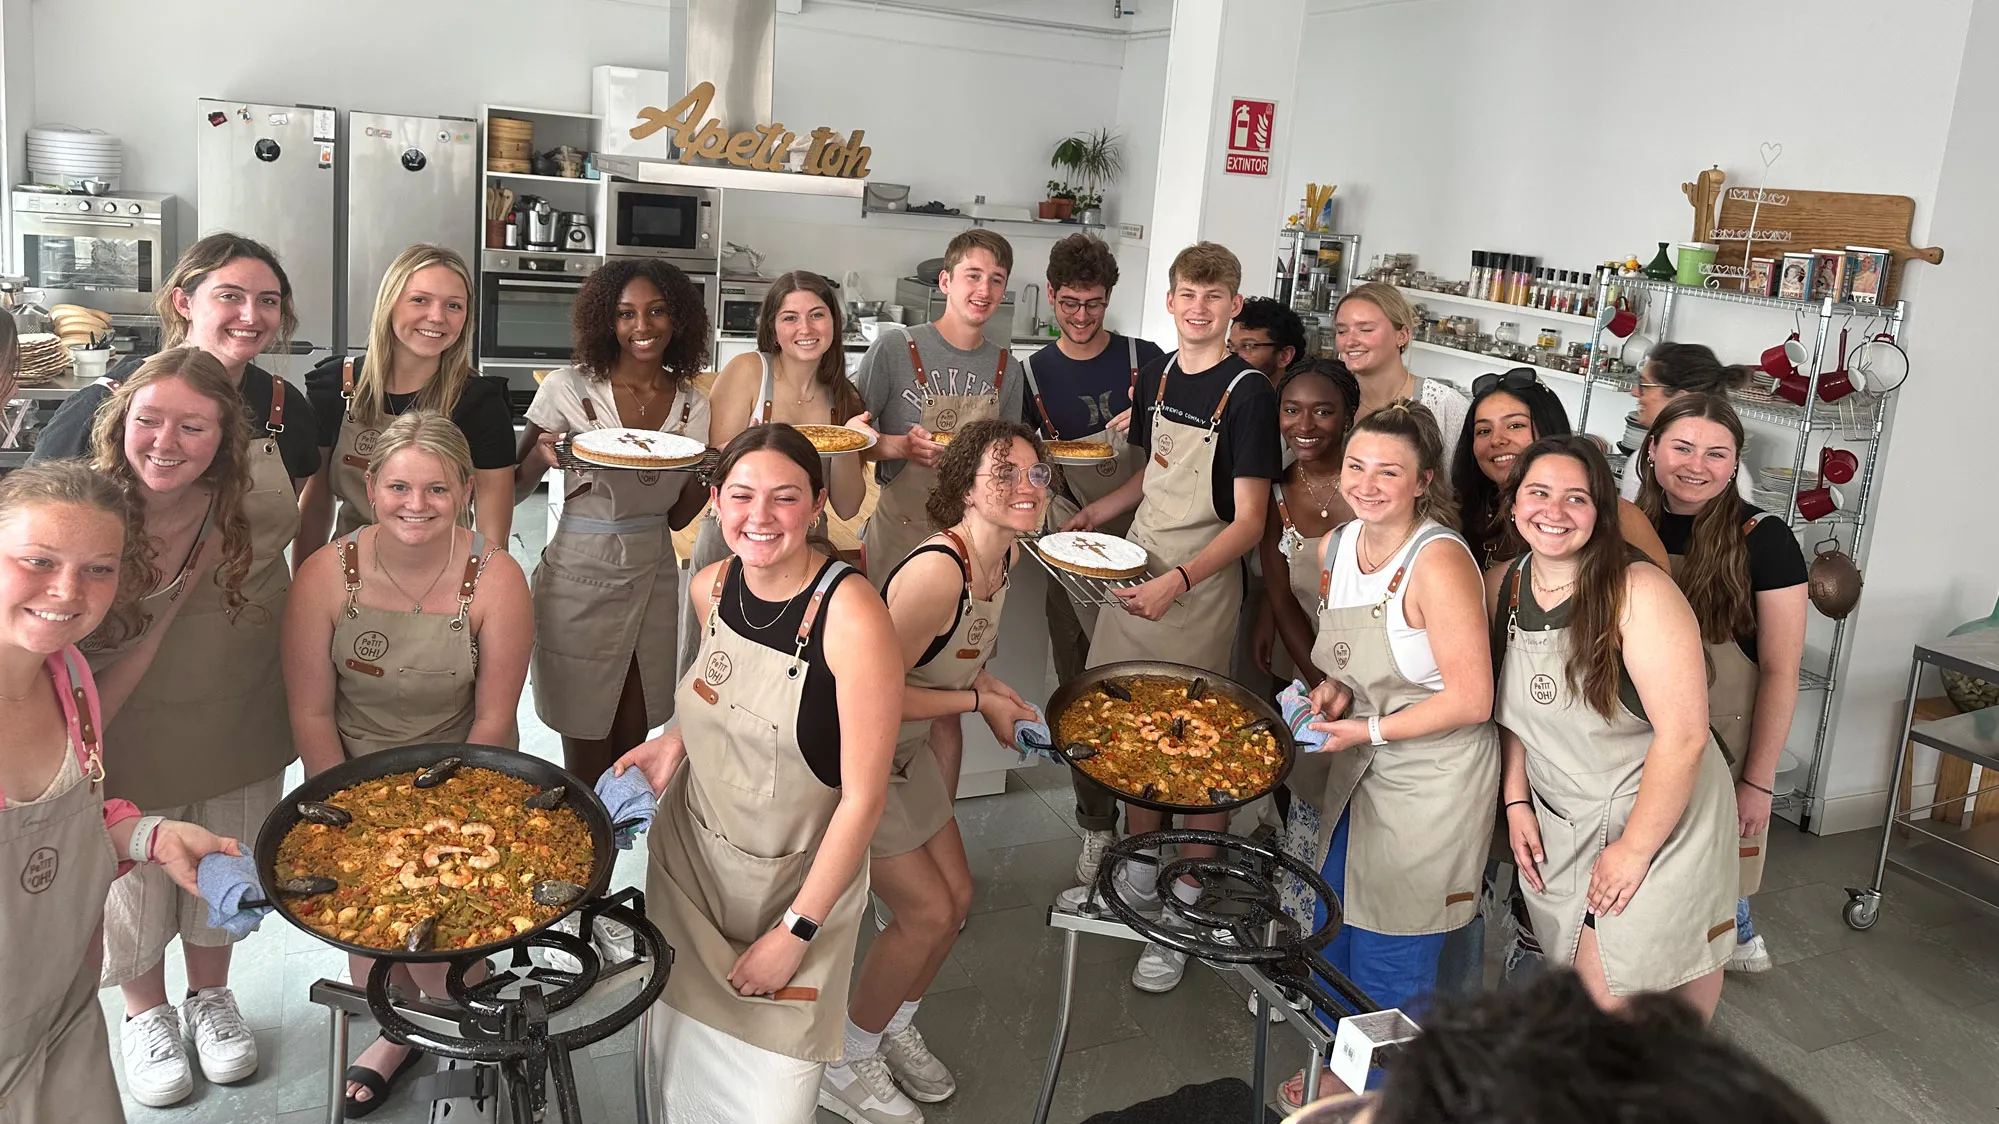 Twenty young people wearing matching aprons gather in a commercial kitchen around big pan-fulls of paella, a traditional Spanish dish.